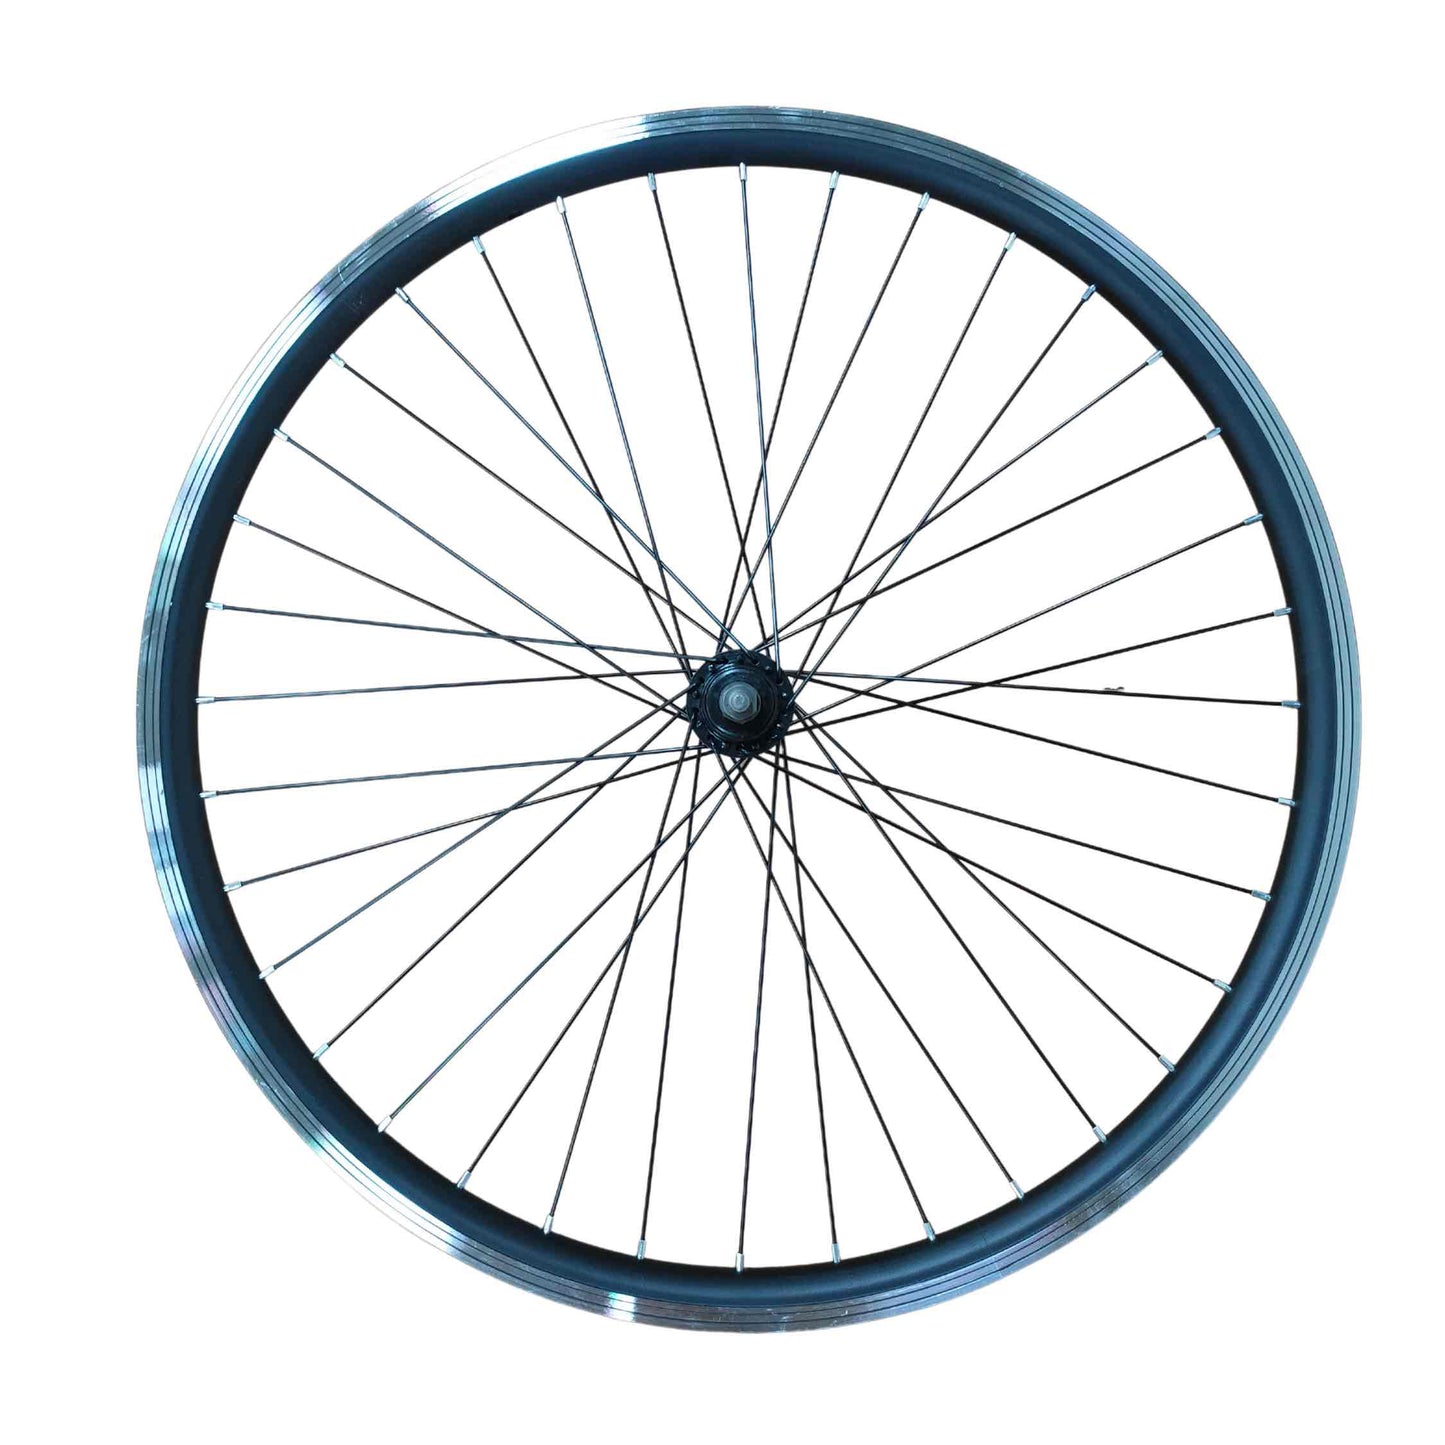 OMO Bikes - Bicycle Alloy Rims - Double Wall - 700c (Fully Laced)